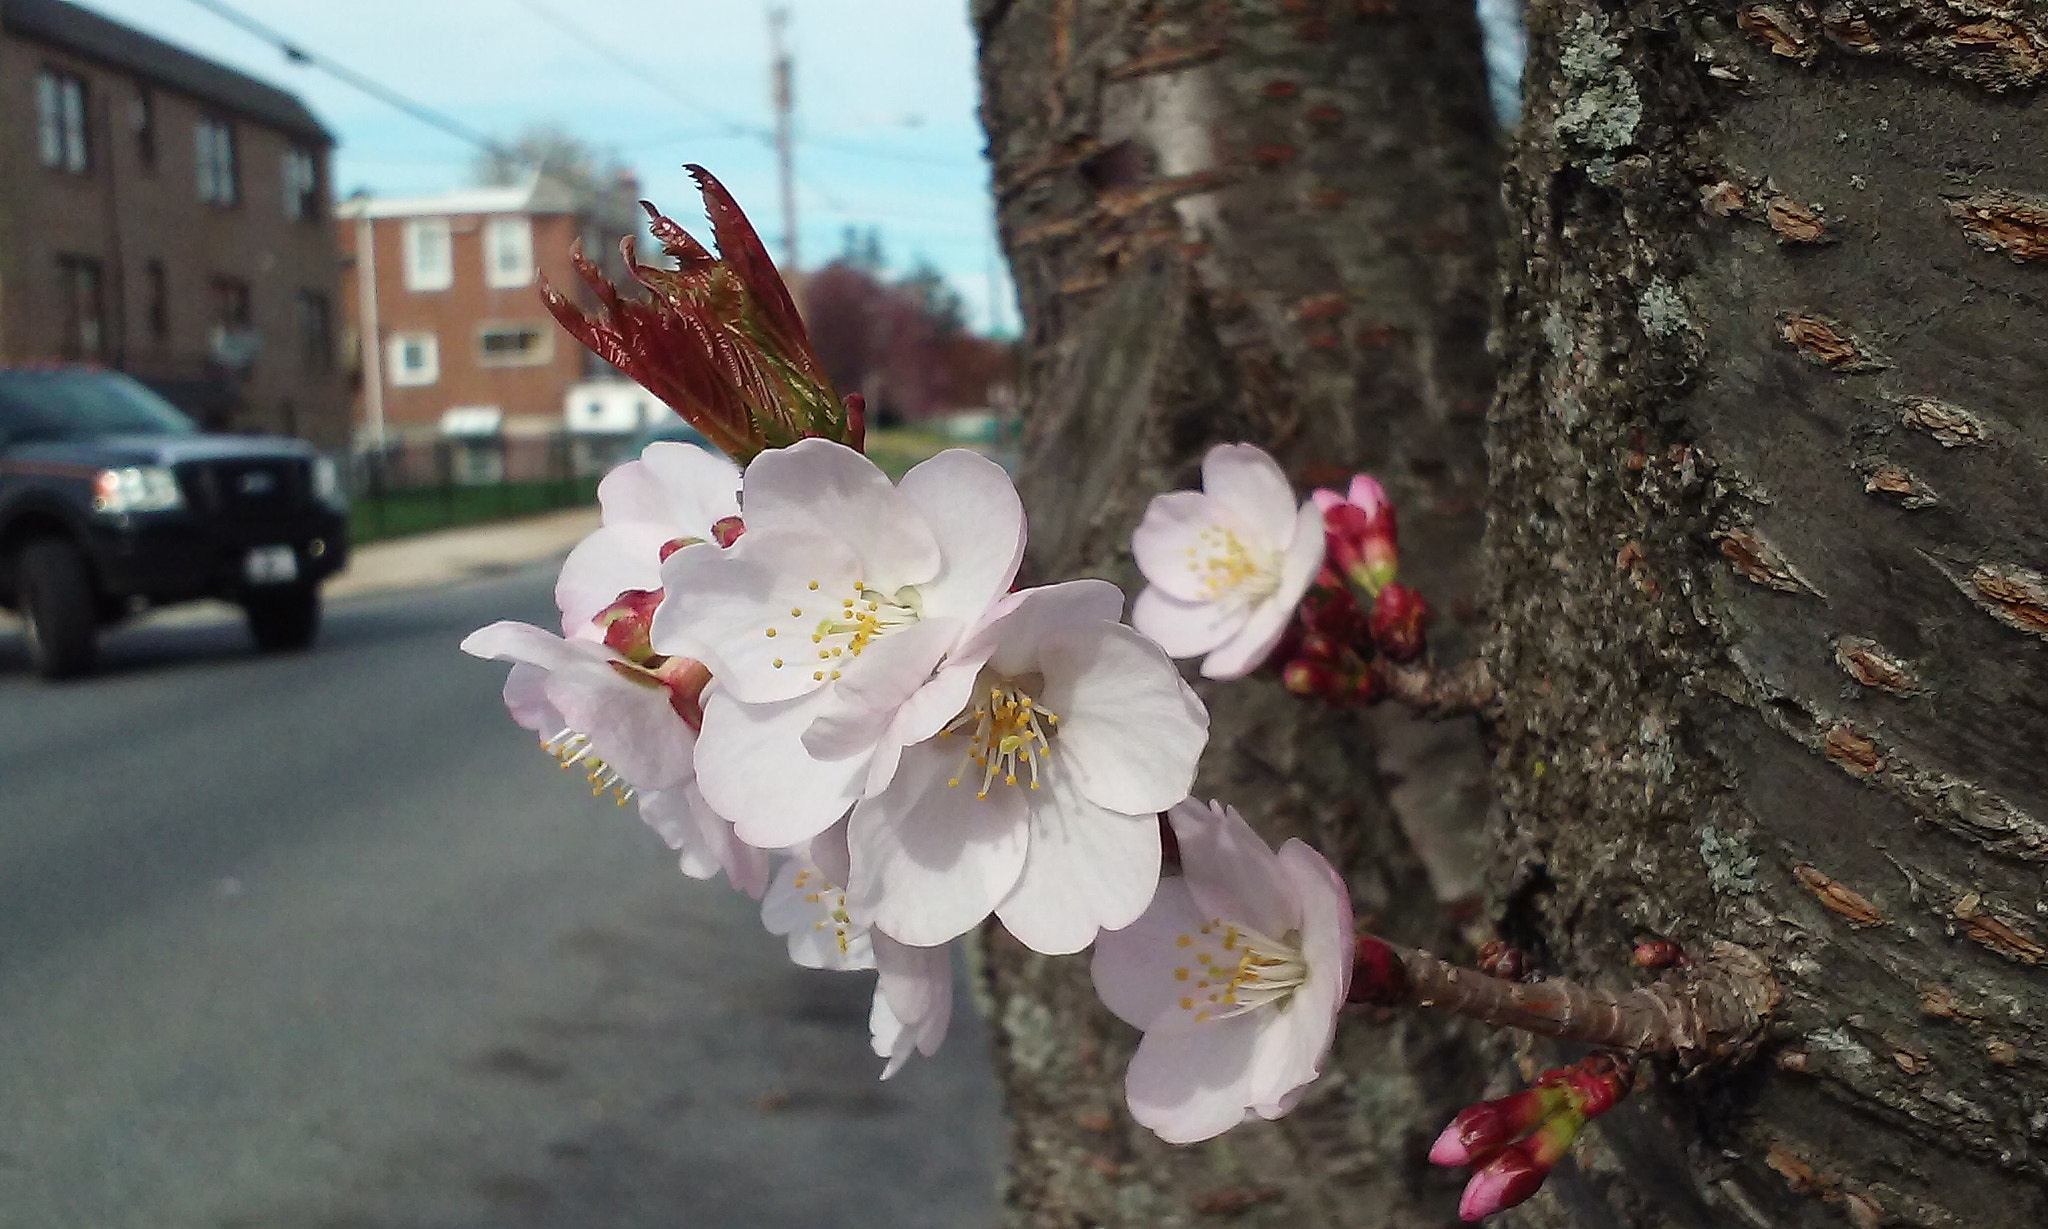 LG F60 sample photo. Odd place for blossoms photography